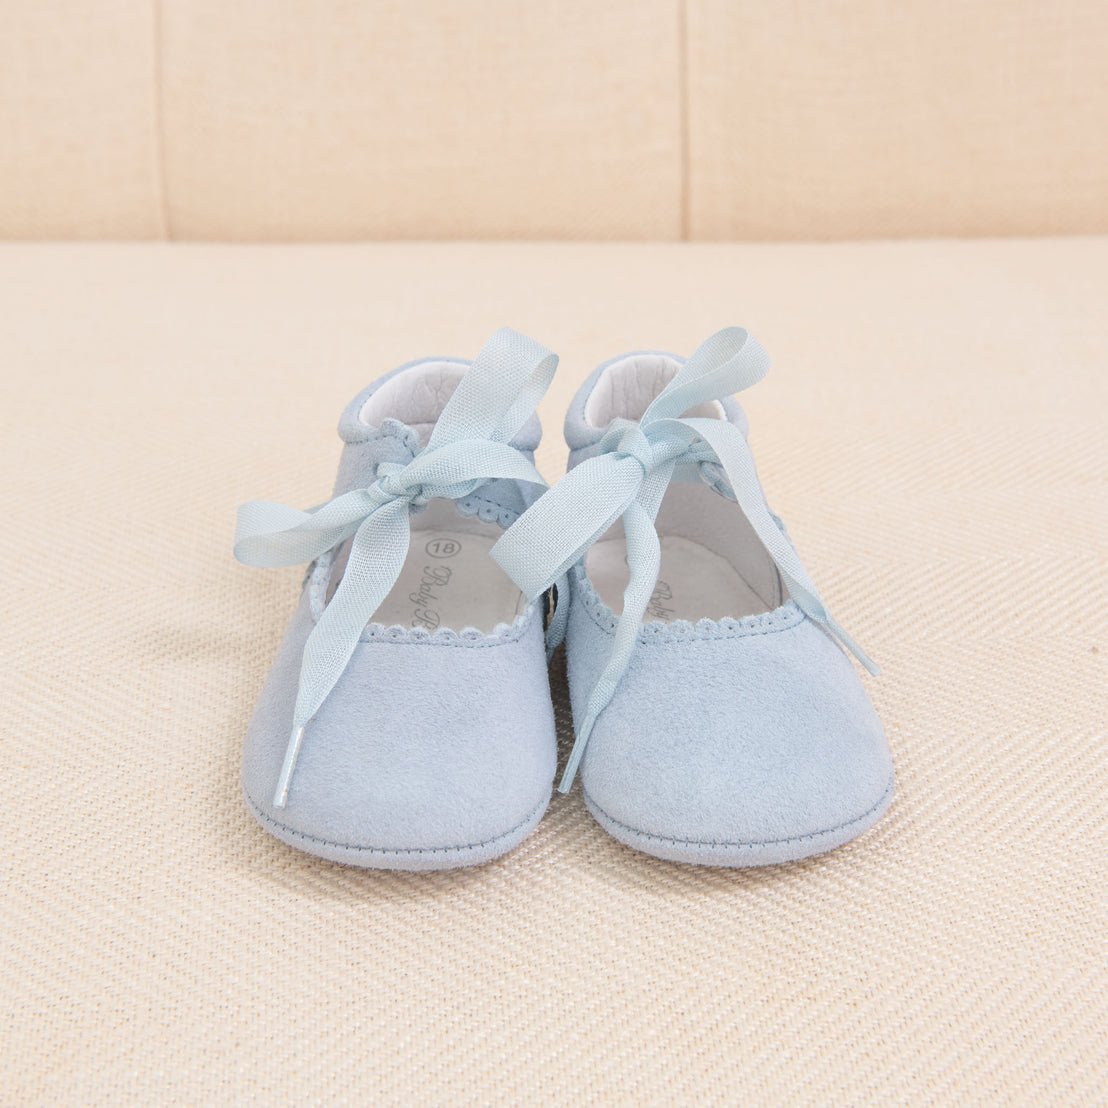 A pair of Girls Suede Tie Mary Janes handmade shoes with light blue ribbons and scalloped edges, sitting on a textured beige fabric background.